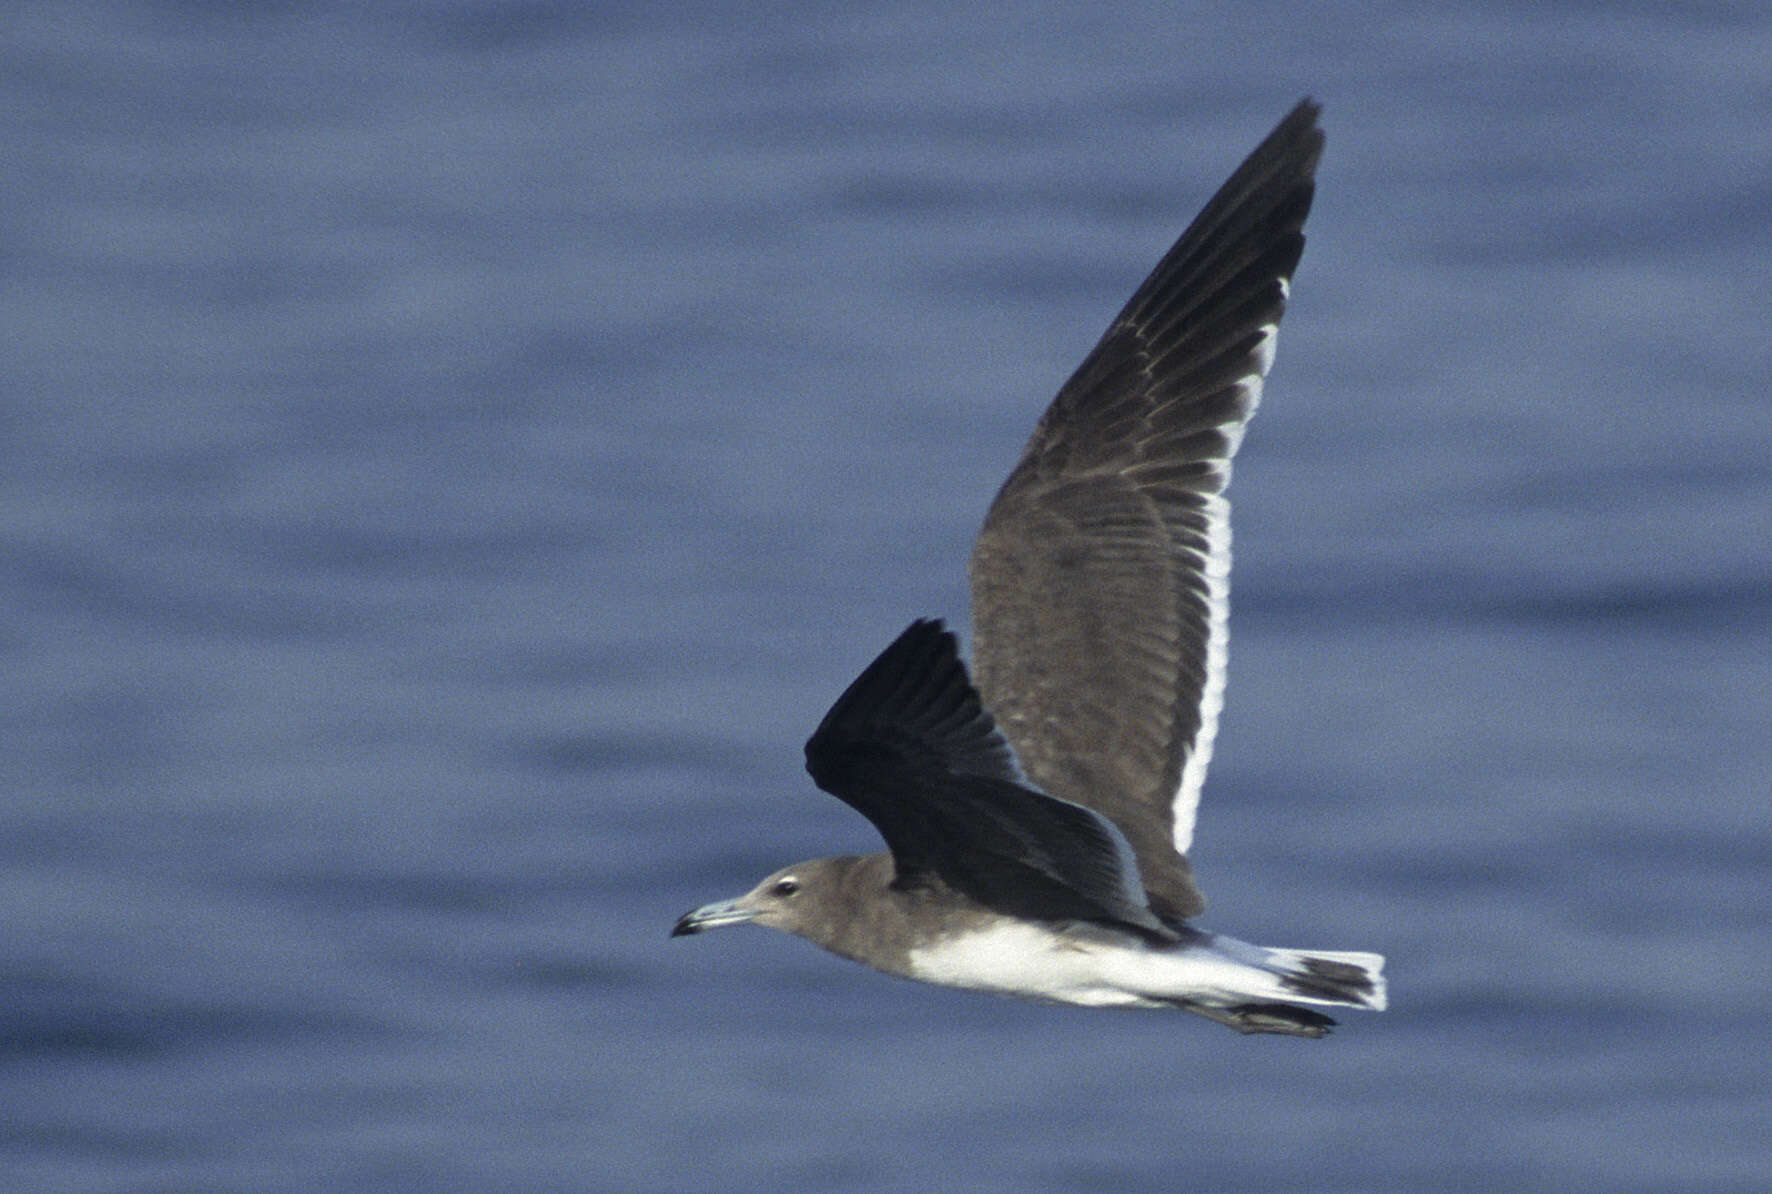 Image of Sooty Gull